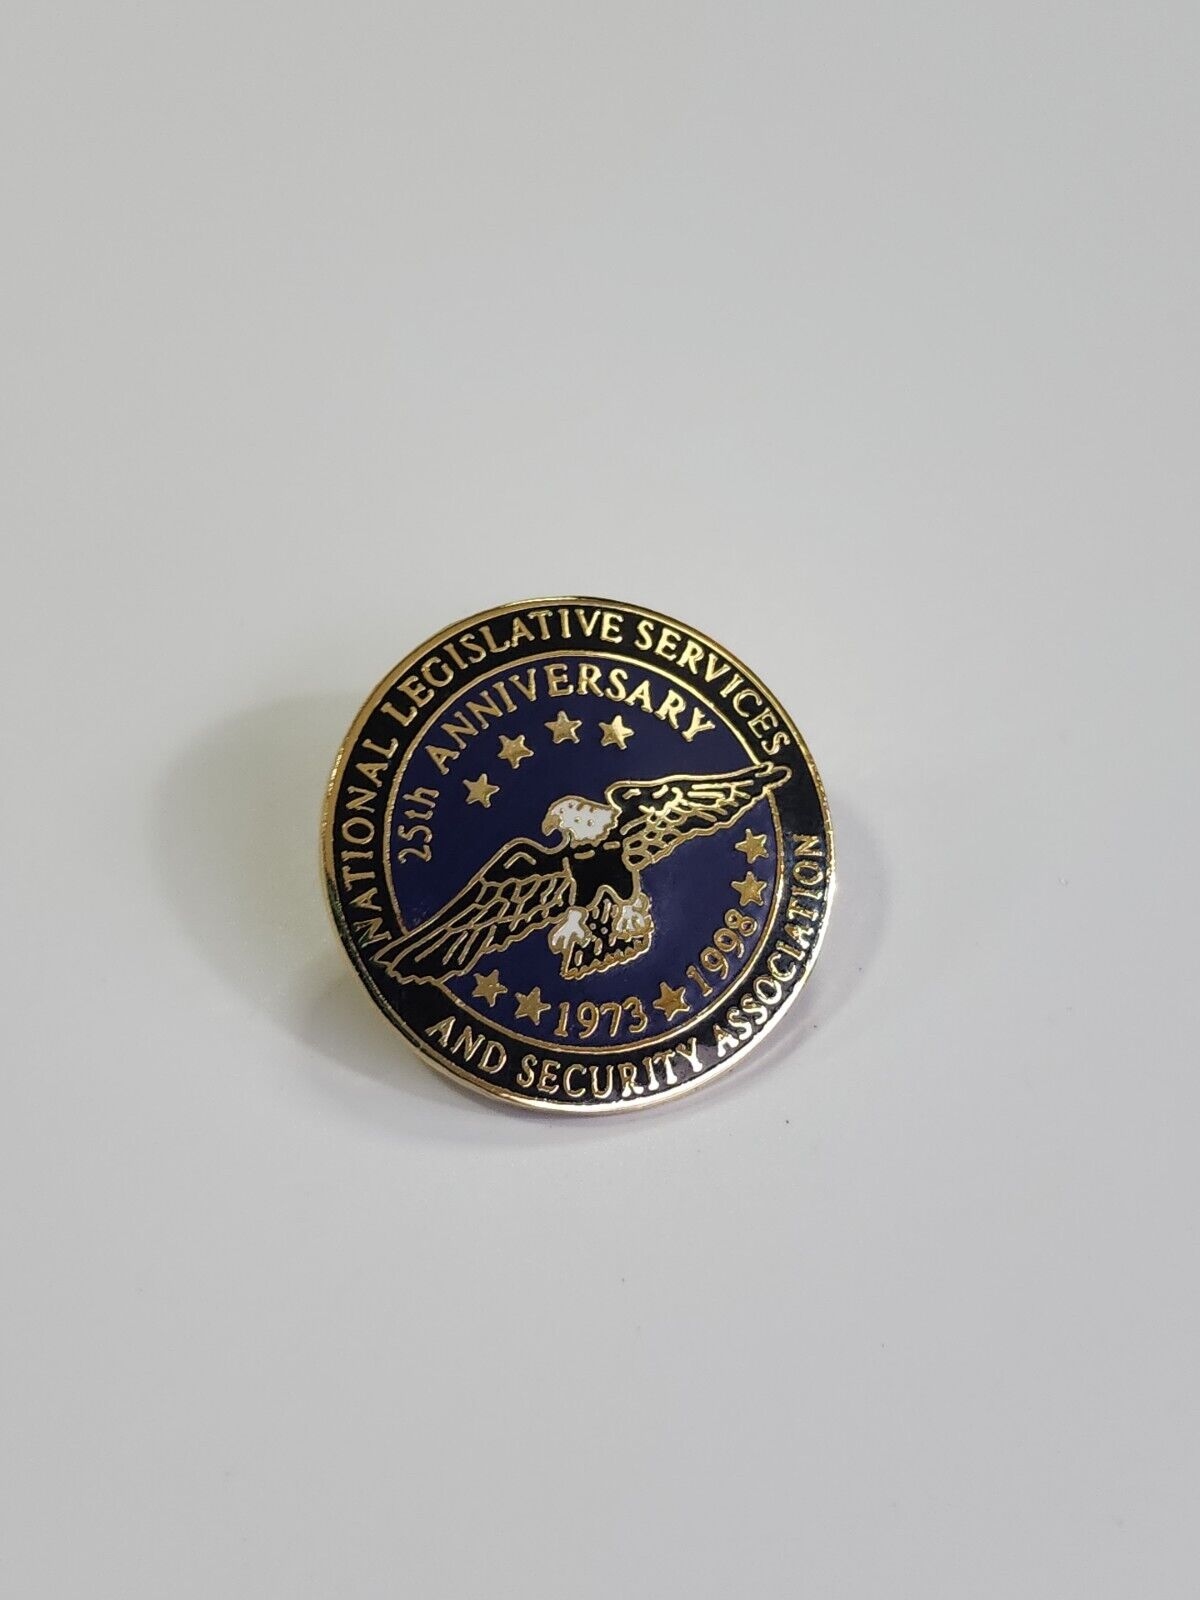 National Legislative Services and Security Association 25th Anniversary Pin 1998